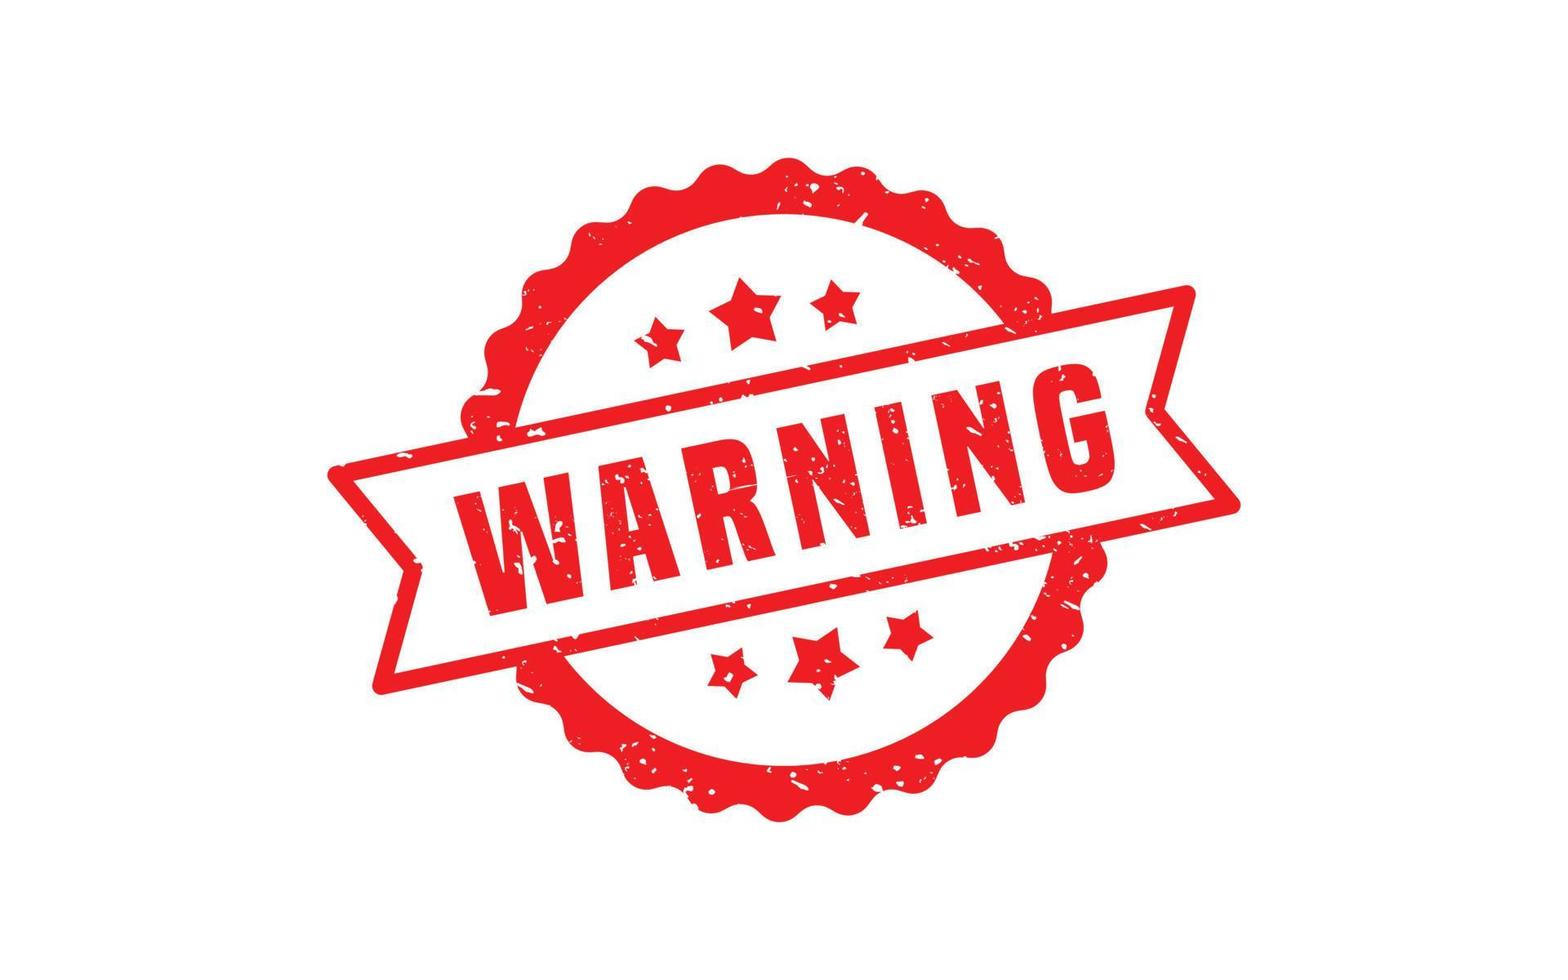 WARNING rubber stamp with grunge style on white background vector